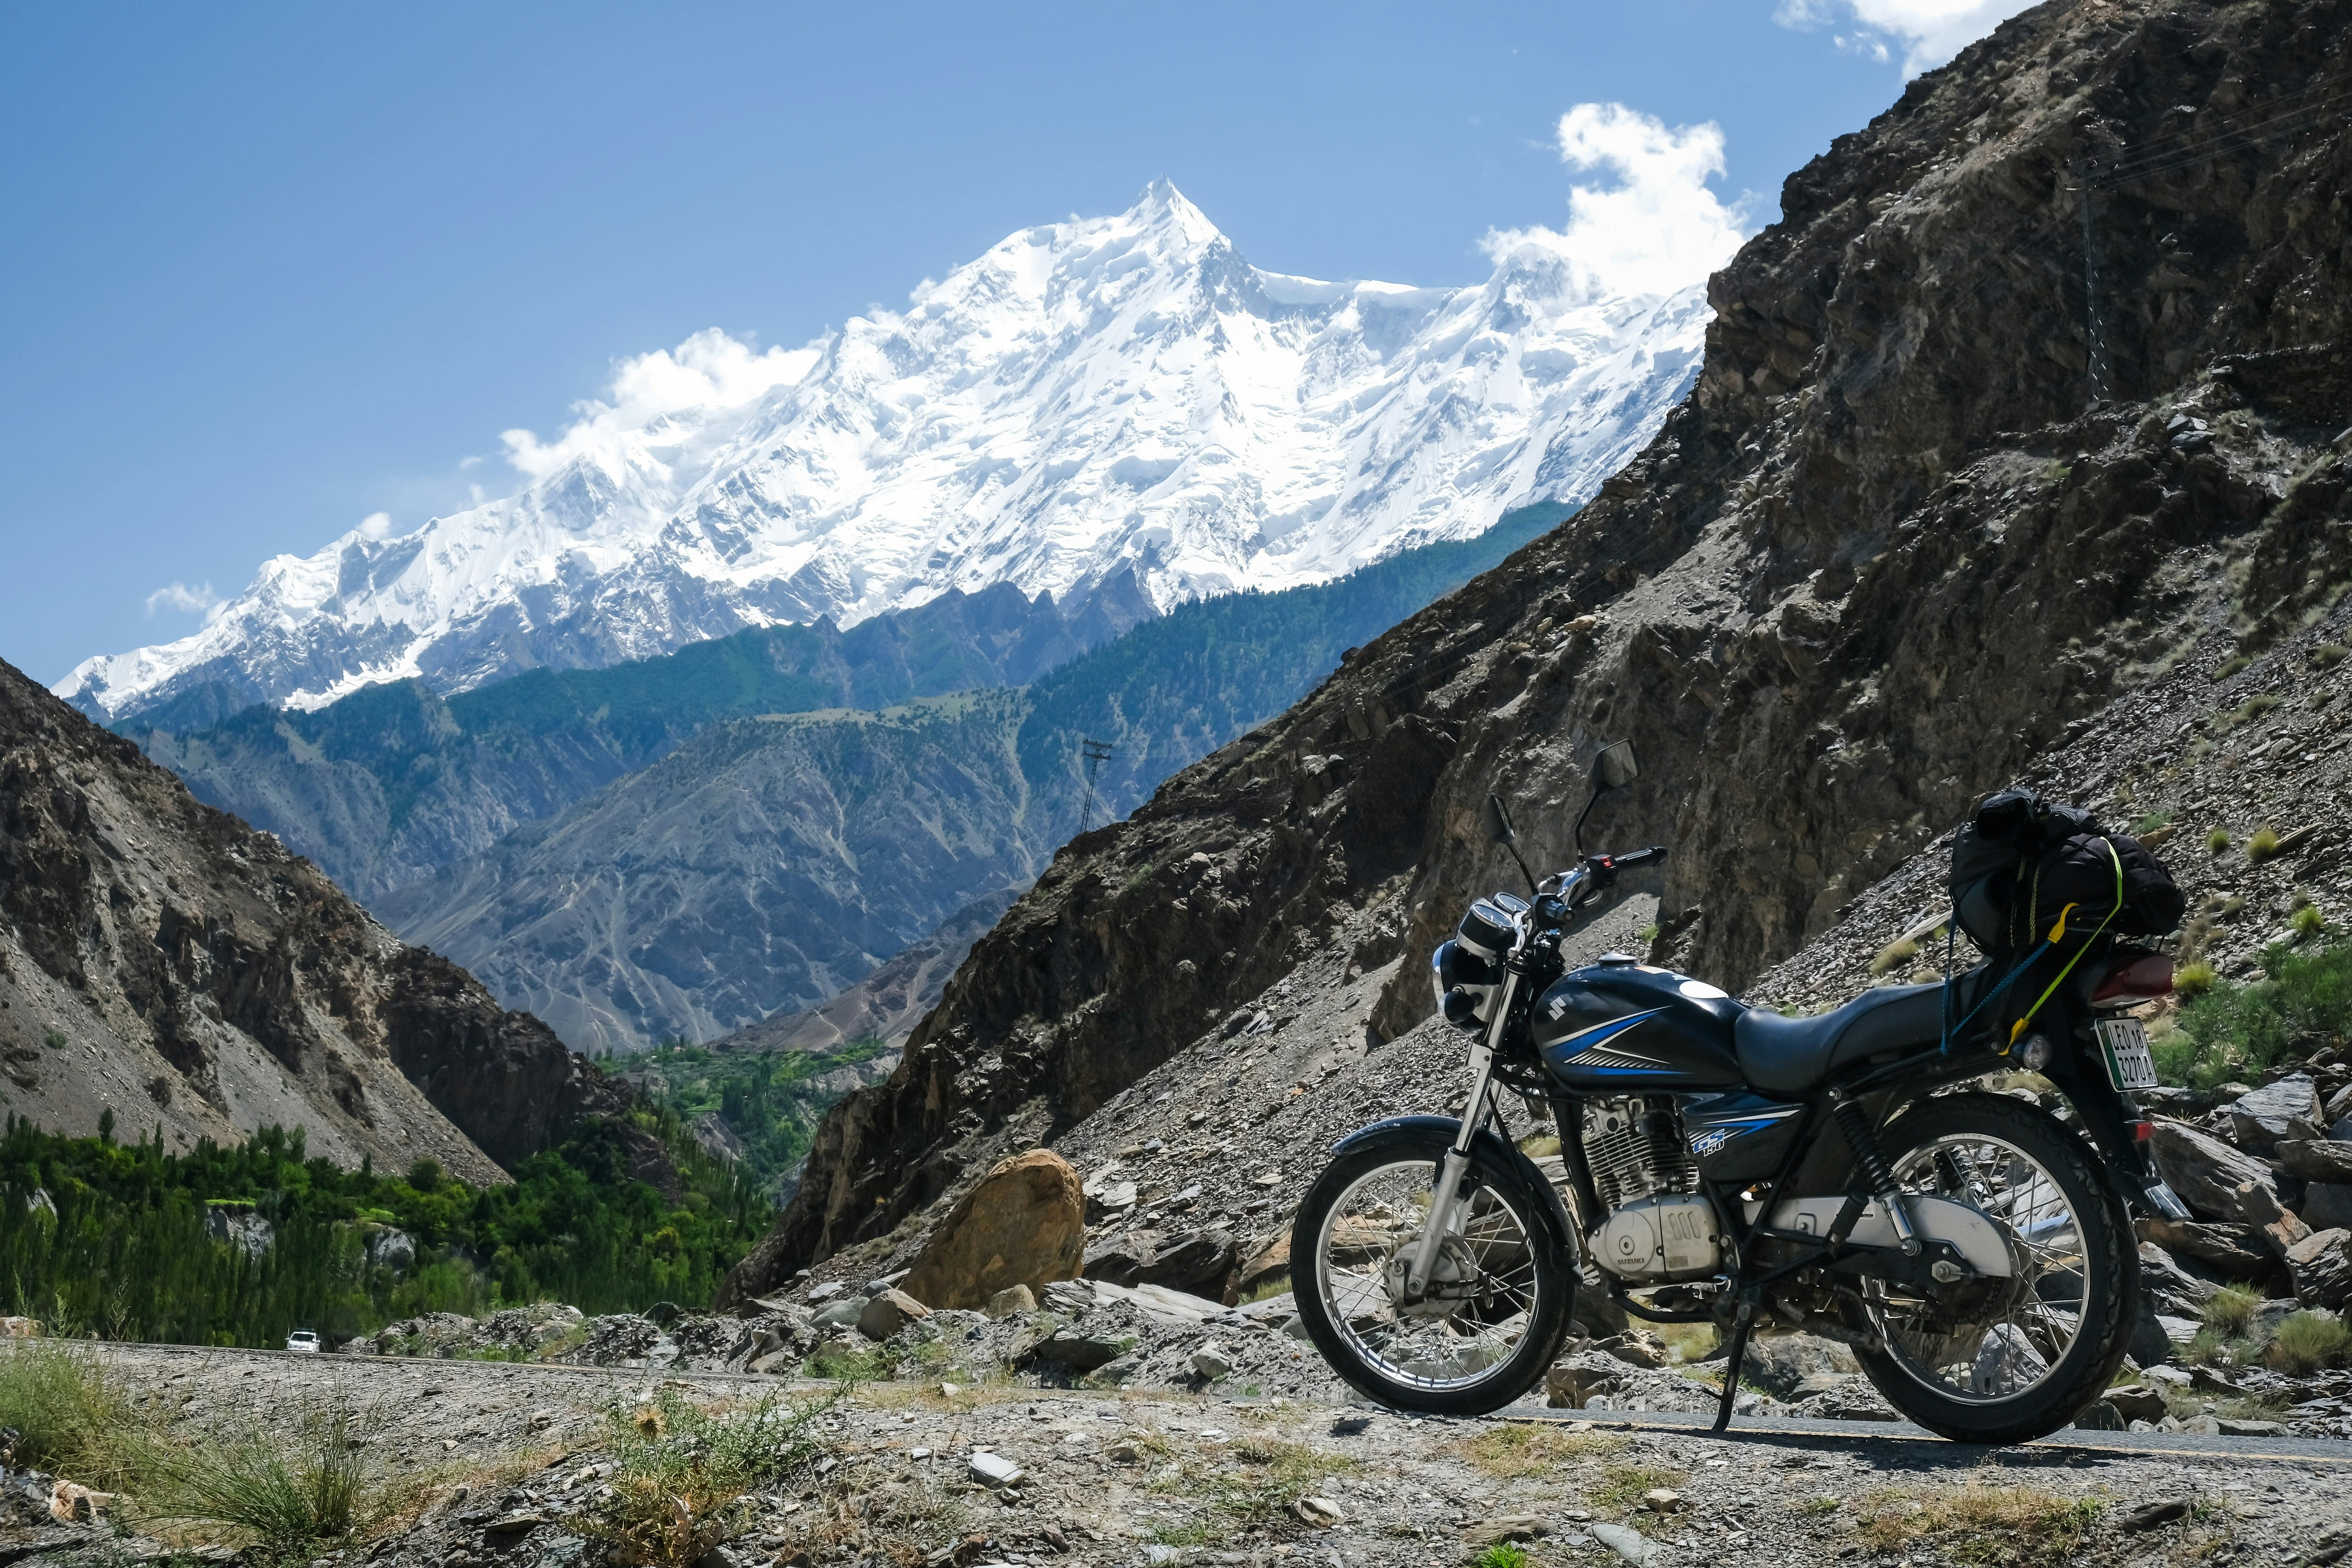 A motorbike stands next to a clearing in the mountains of Northern Pakistan. In the background, snow-covered mountains are visible.